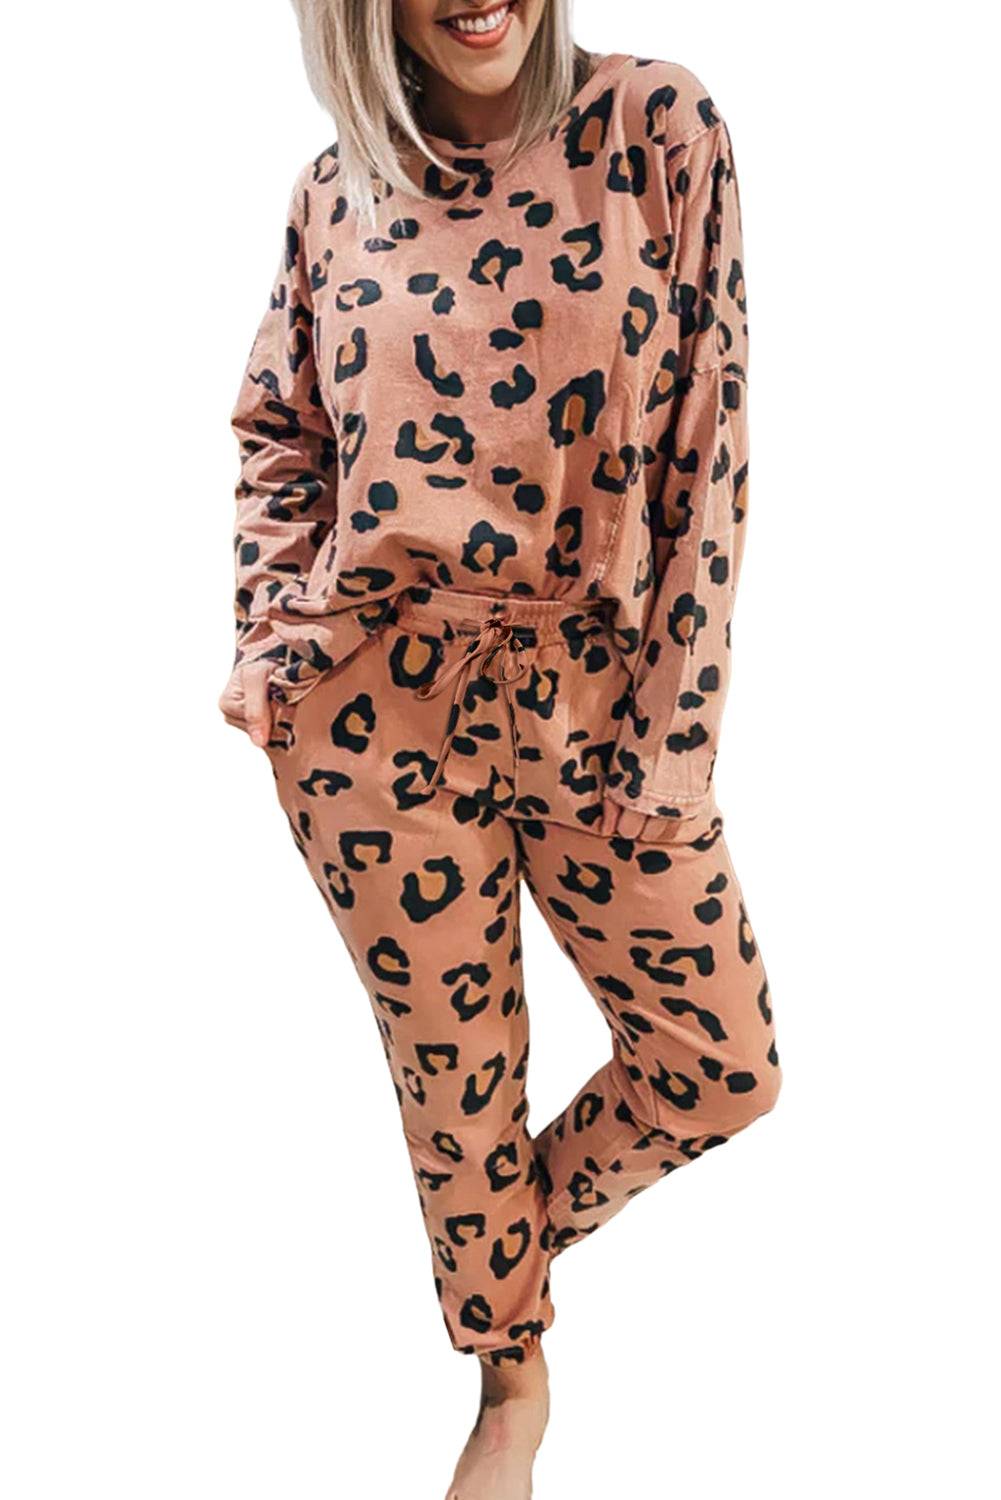 a woman wearing a pink and black leopard print pajama set